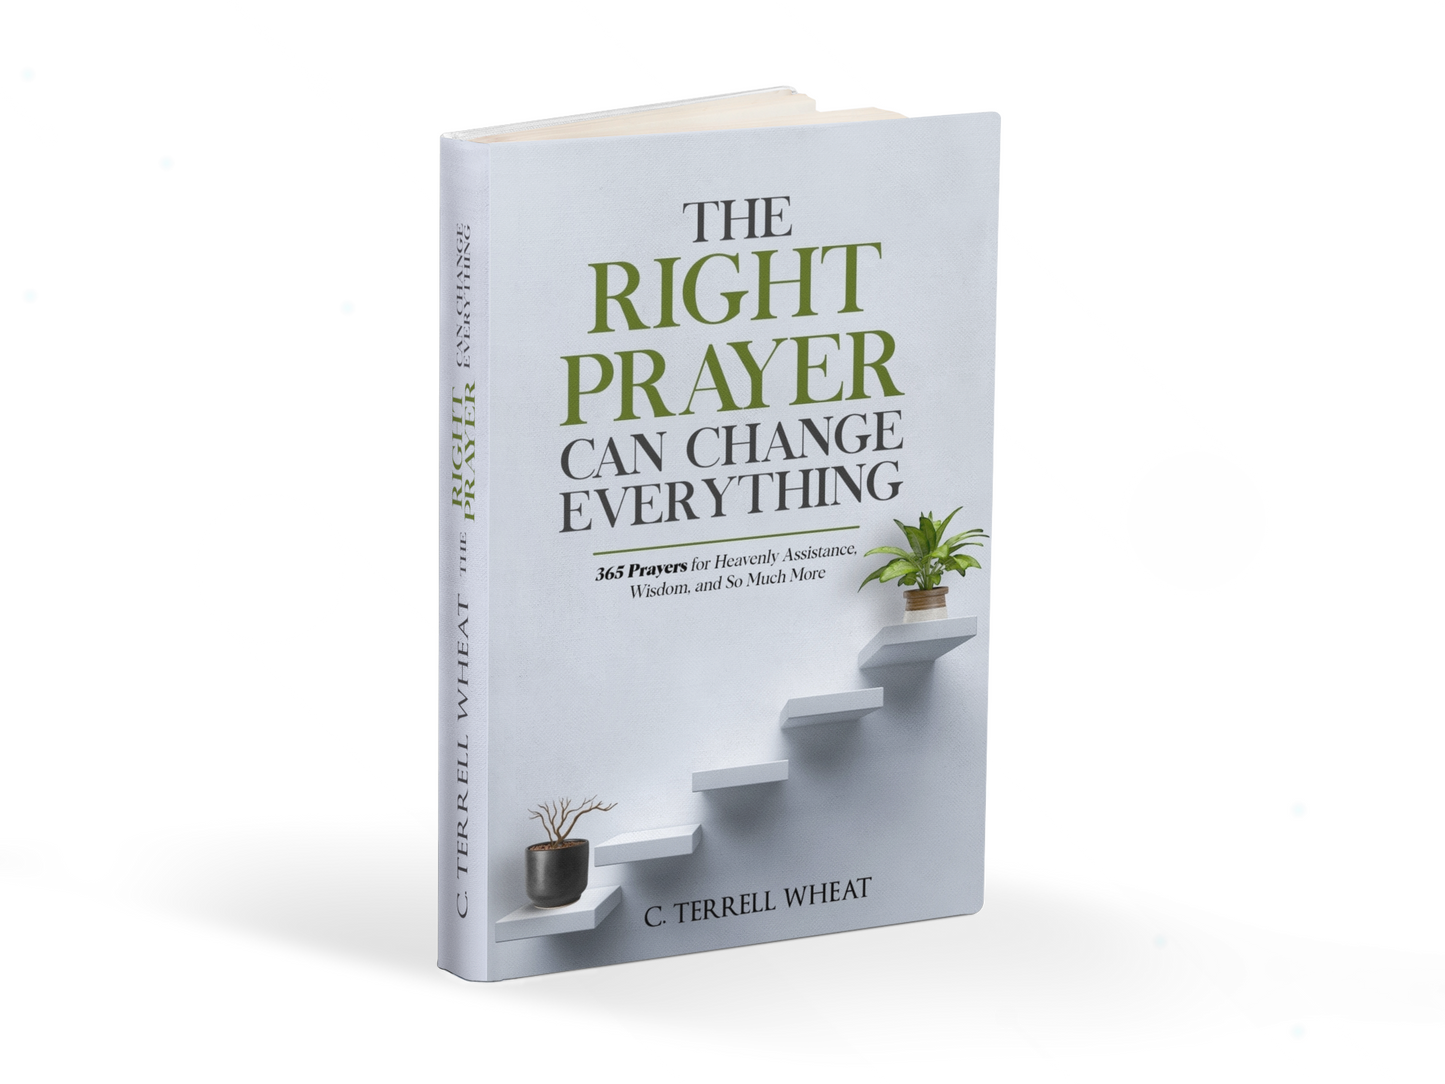 The Right Prayer Can Change Everything